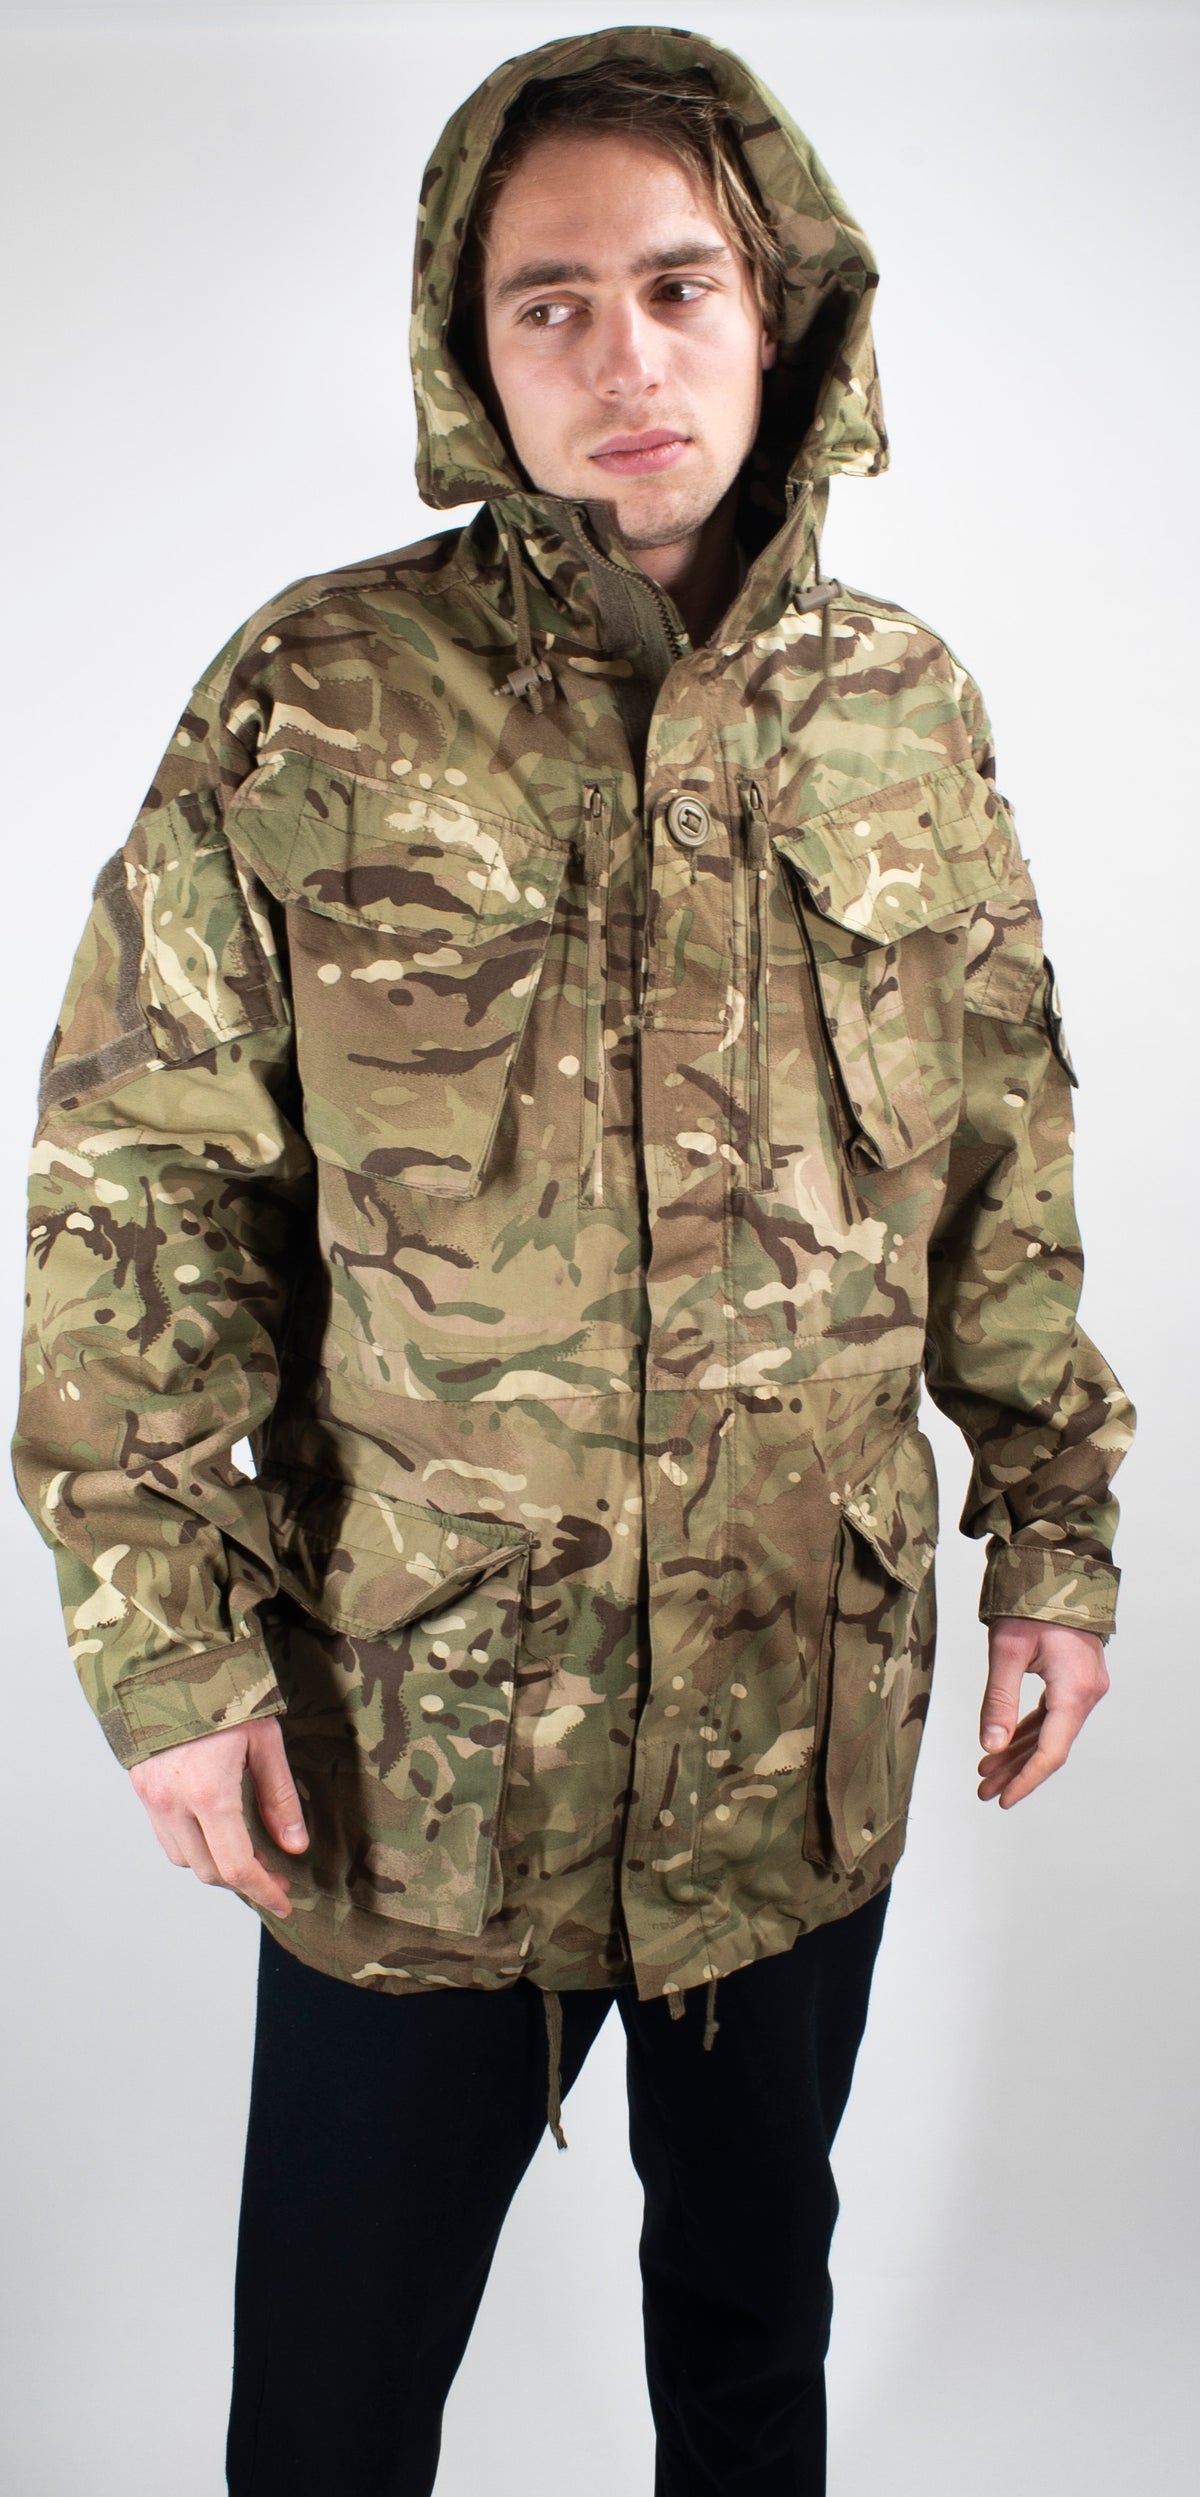 British Army Clothing and Kit - Forces Uniform and Kit